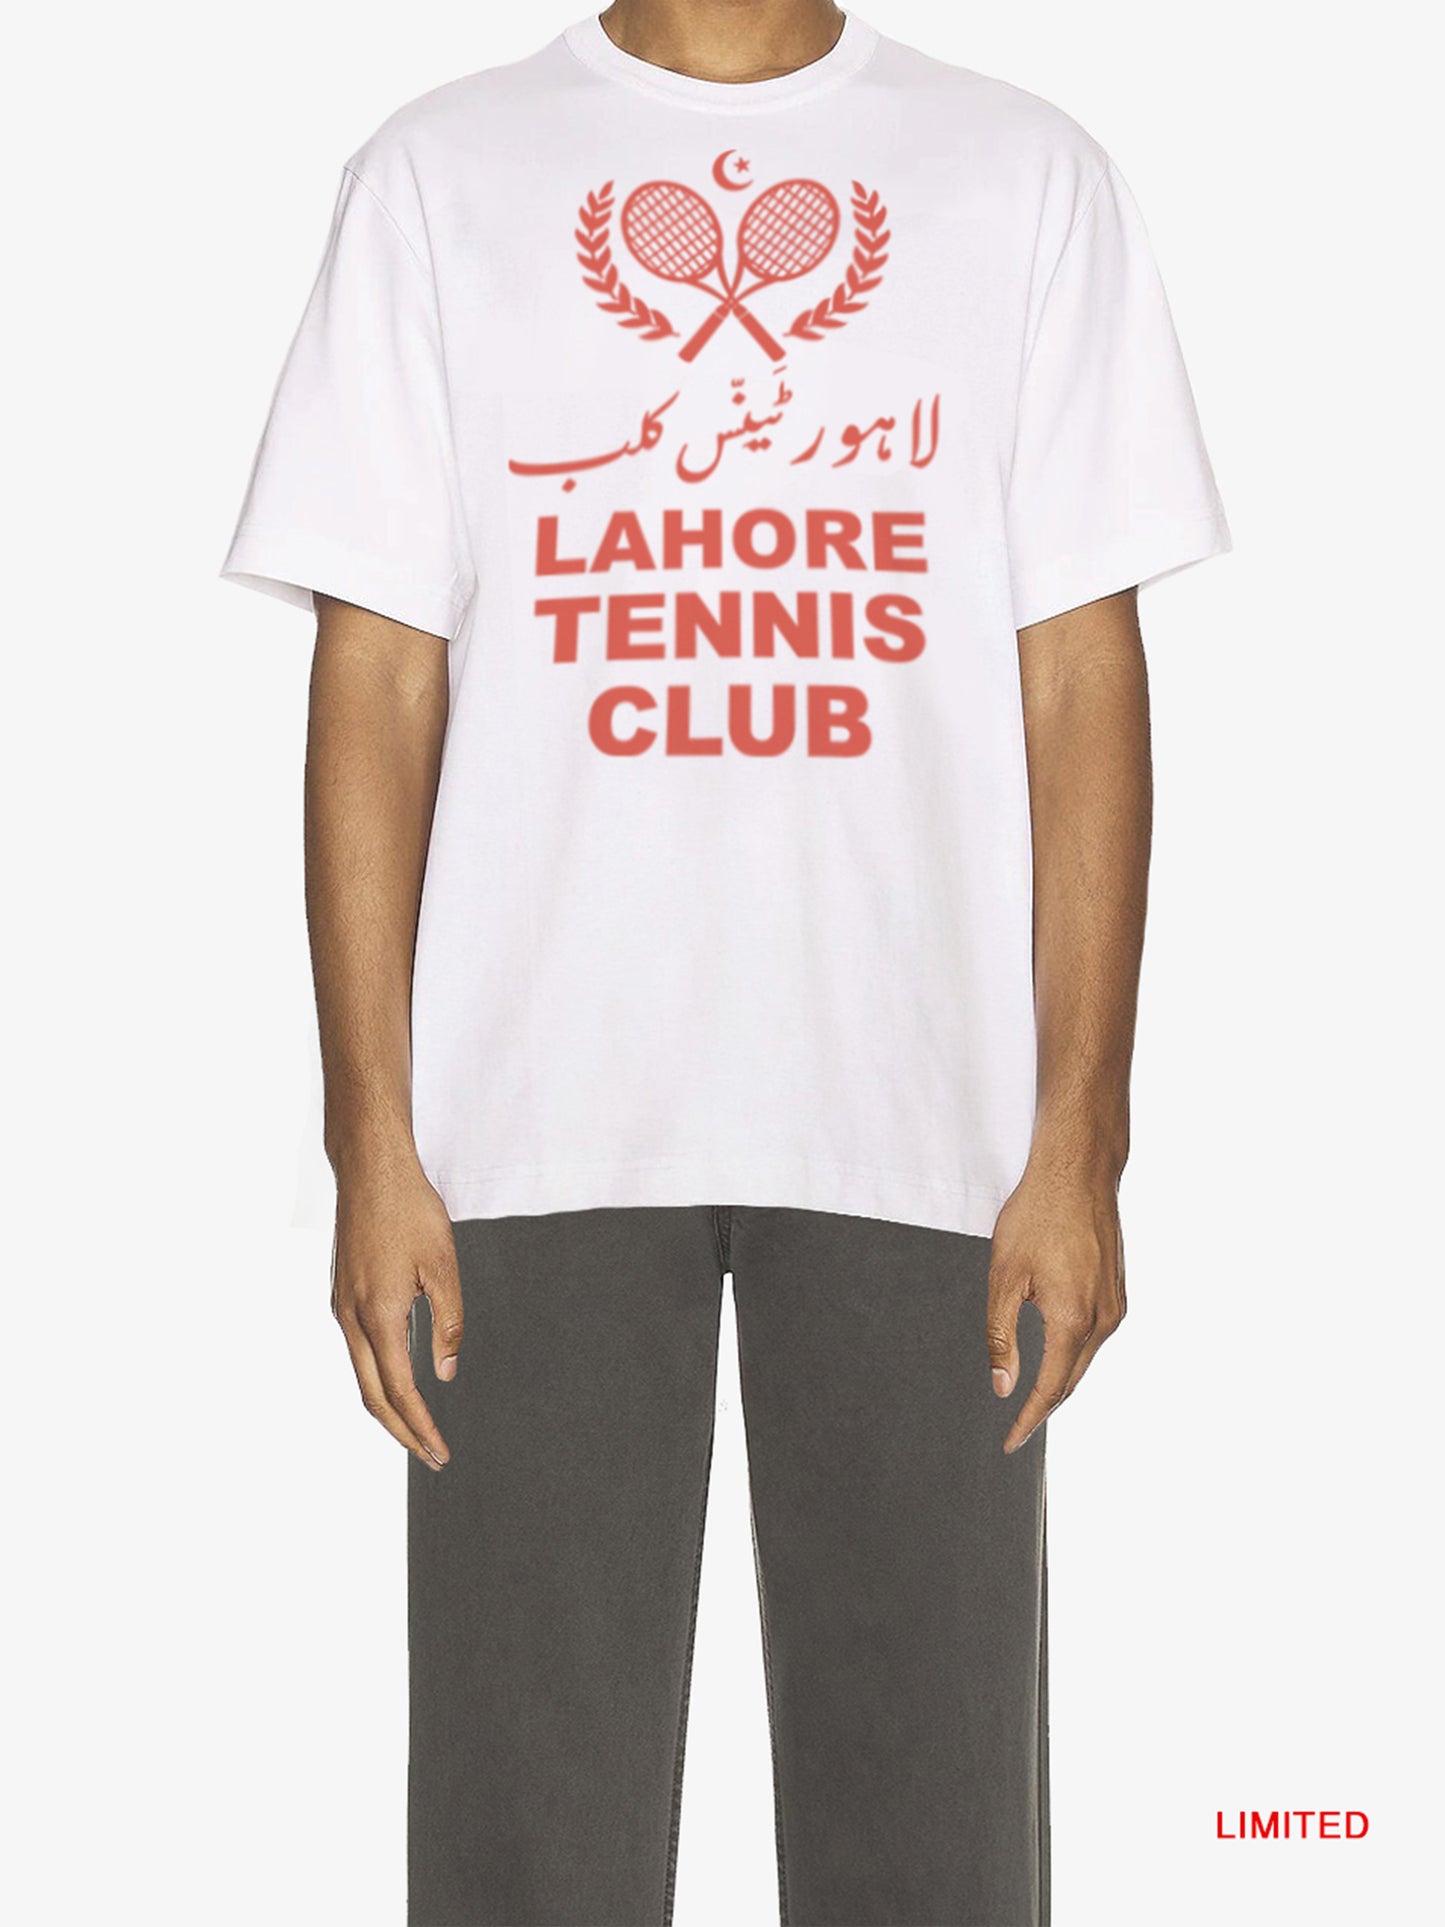 Limited | "Lahore Tennis Club" Classic Tee